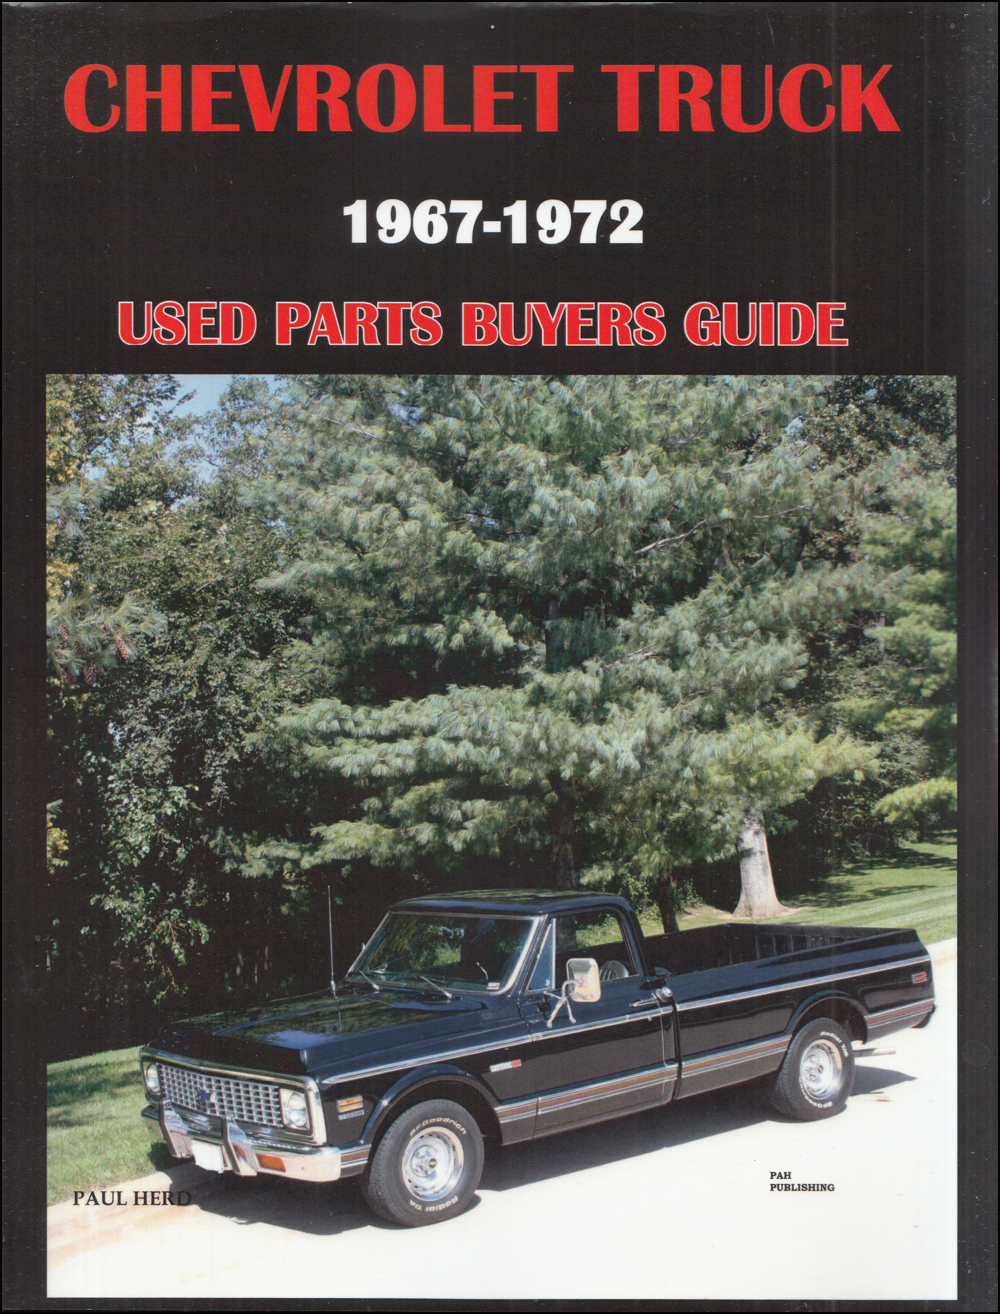 1967-1972 Chevrolet Truck Used Parts Buyers Guide